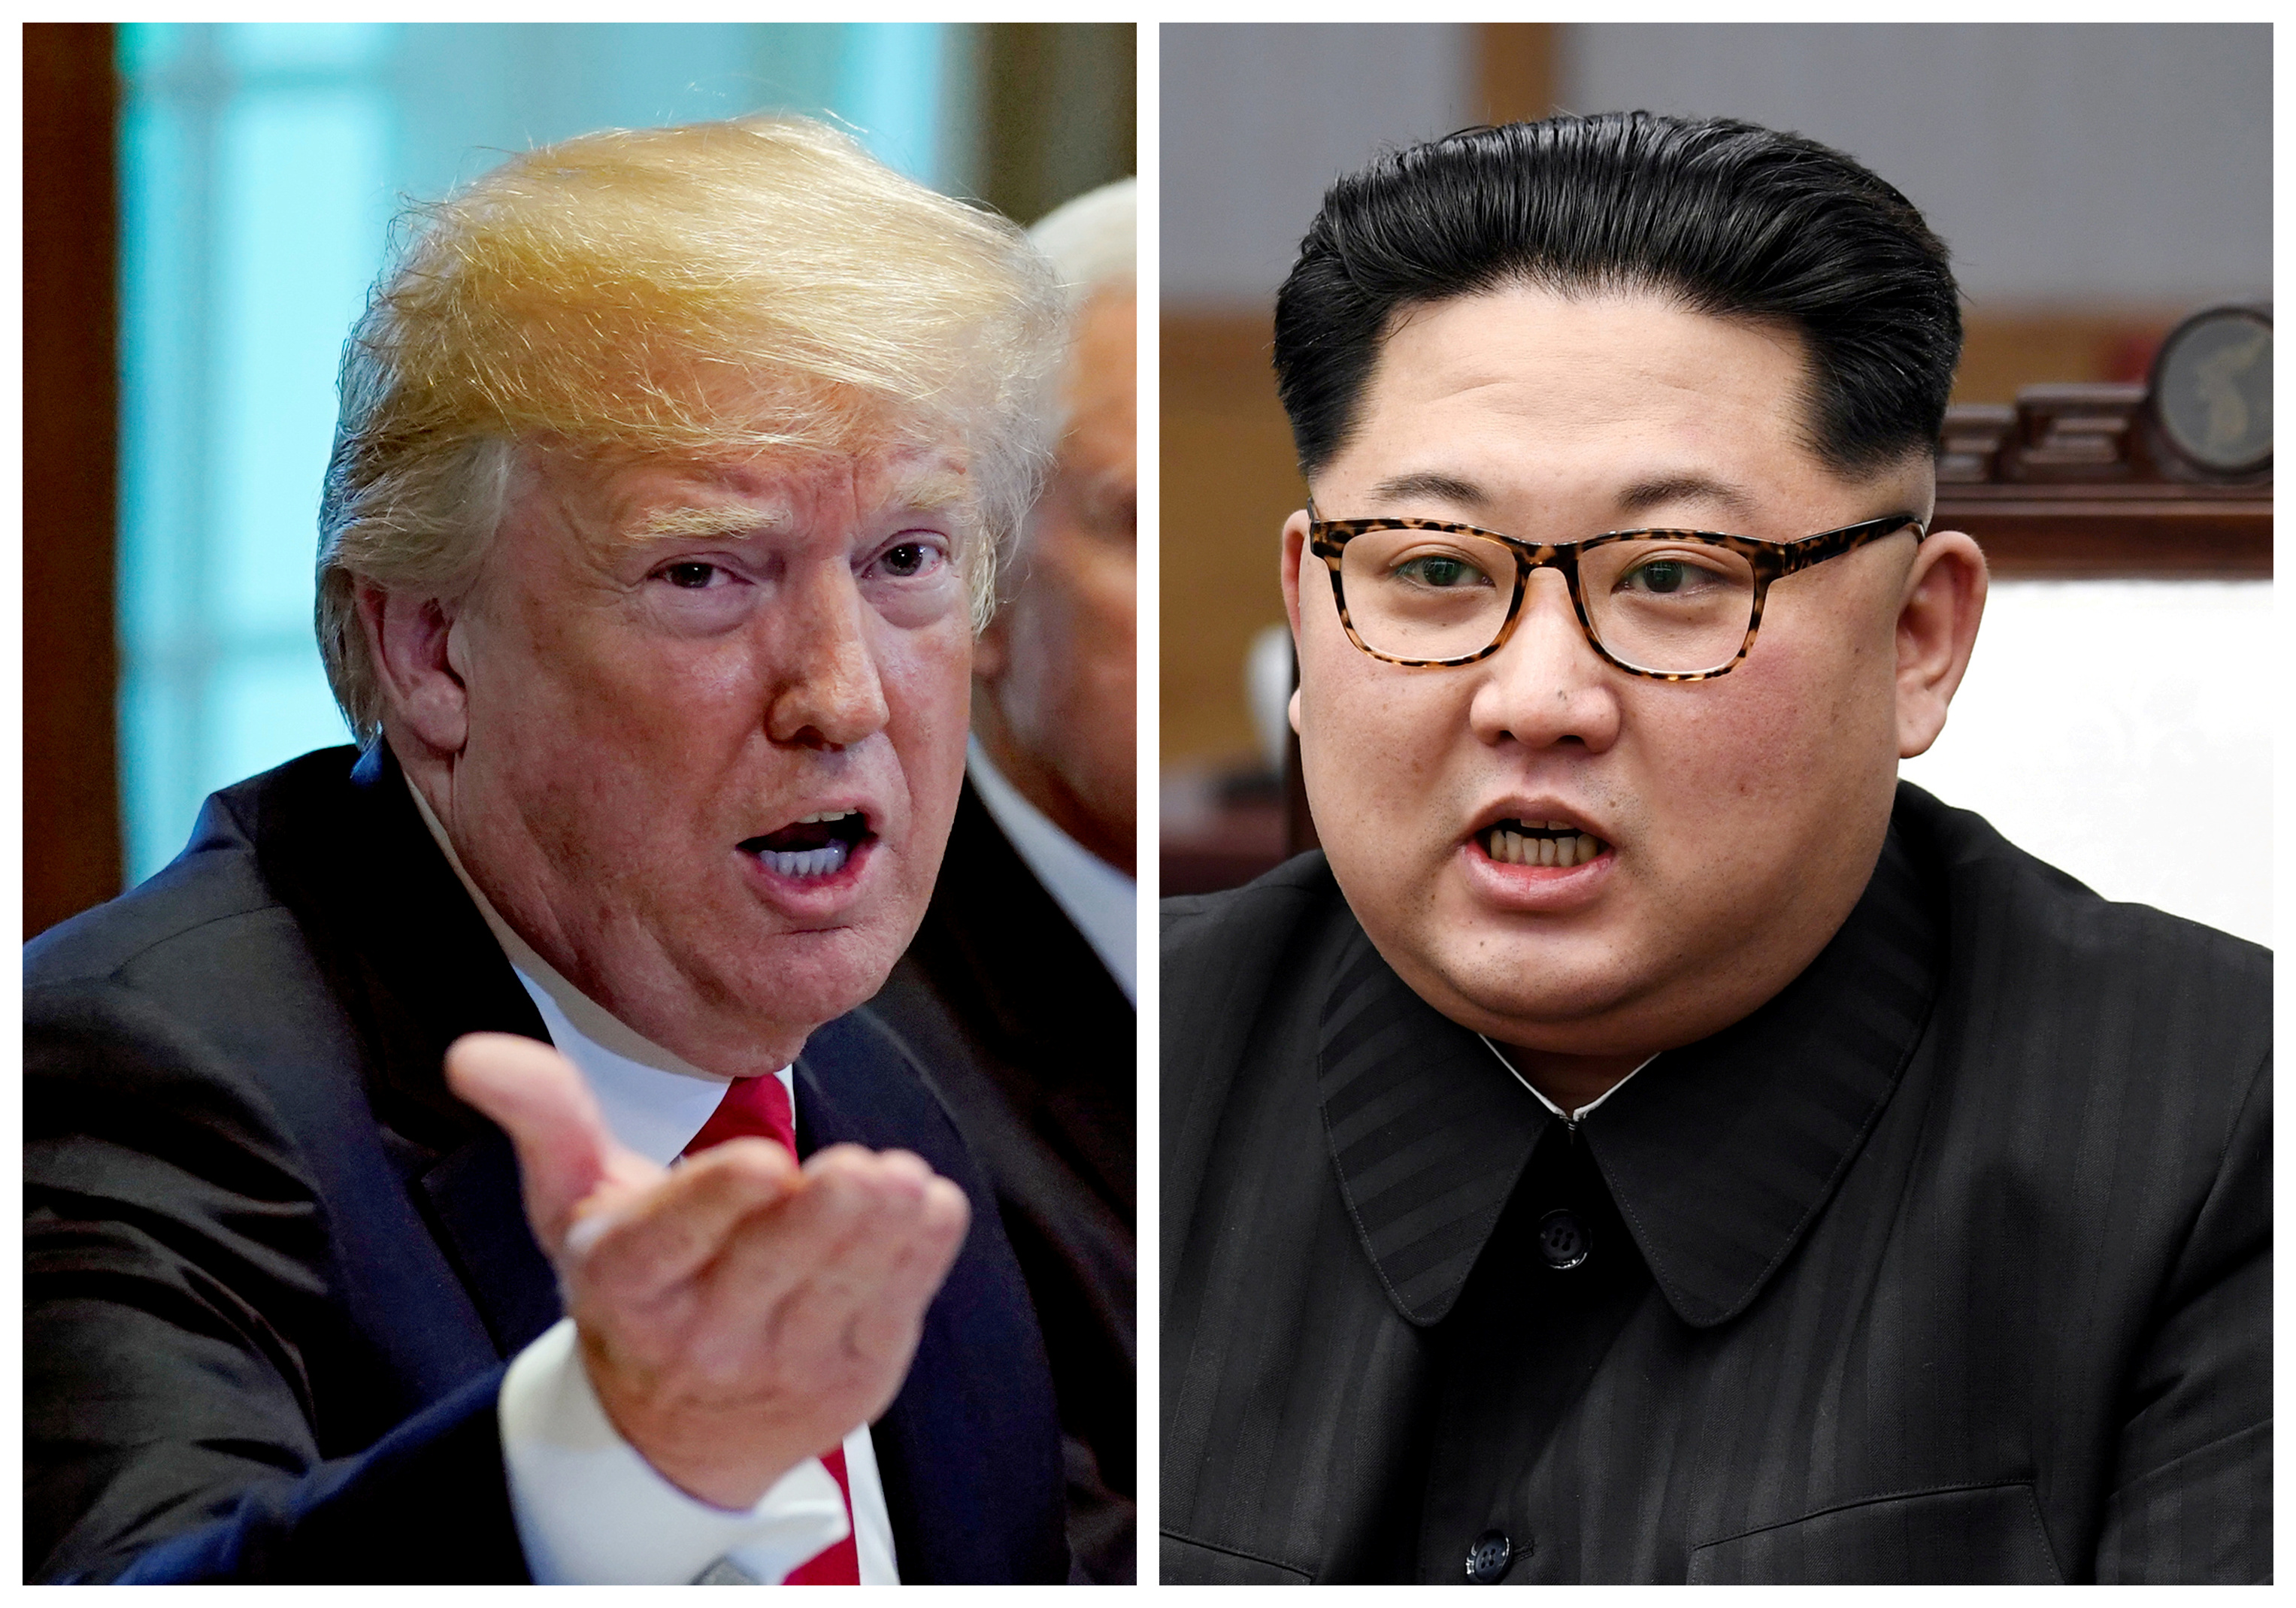 A combination photo shows President Donald Trump and North Korean leader Kim Jong Un in Washington, DC, May 17, 2018 and in Panmunjom, South Korea, April 27, 2018 respectively. (Kevin Lamarque and Korea Summit Press Pool—Reuters)